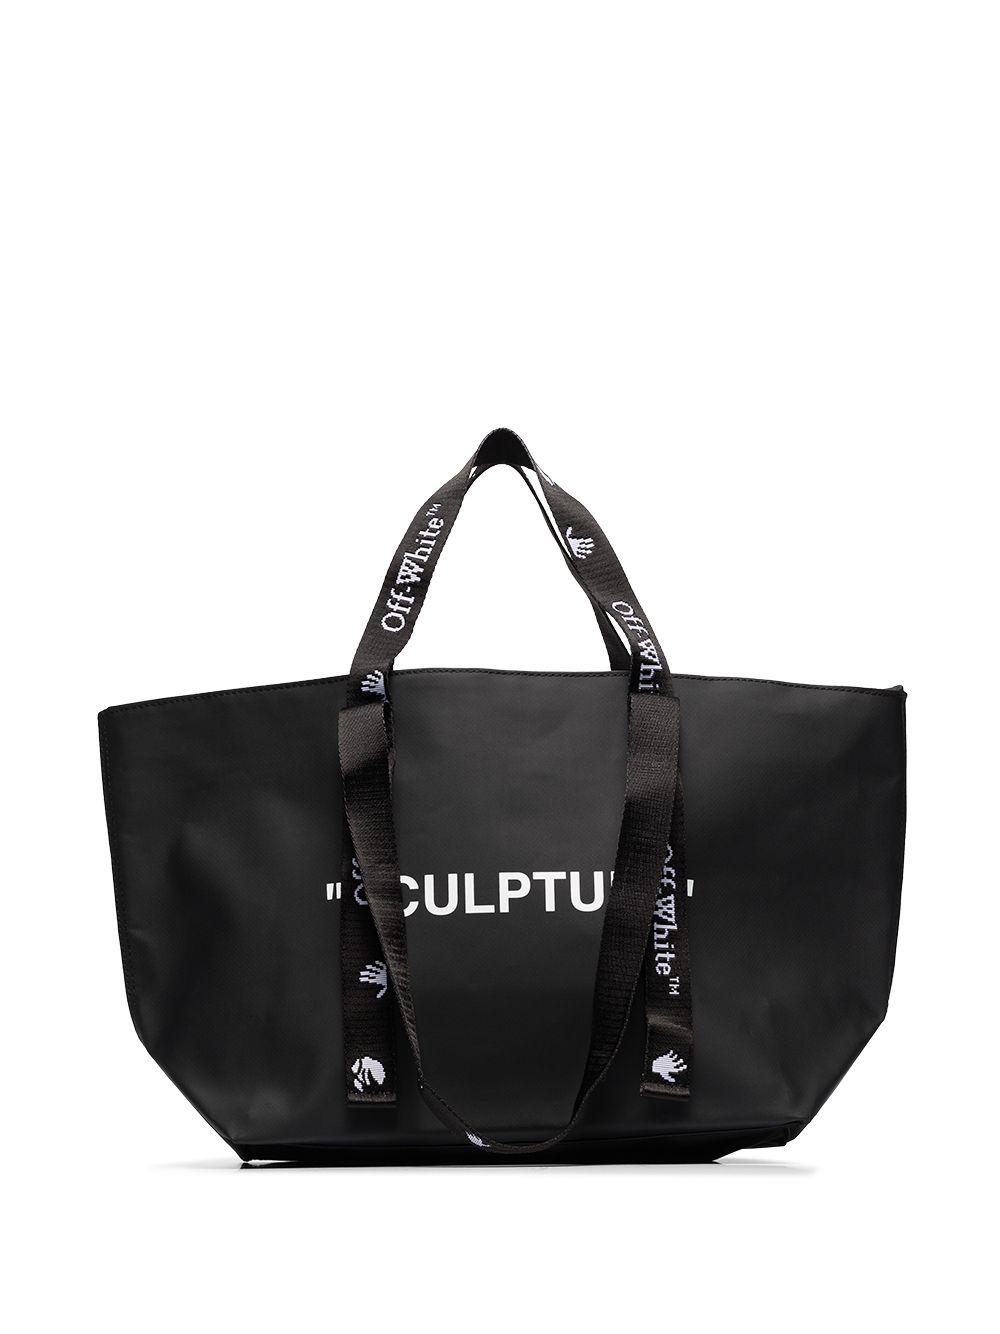 Off-white Black Sculpture Large Leather Tote Bag